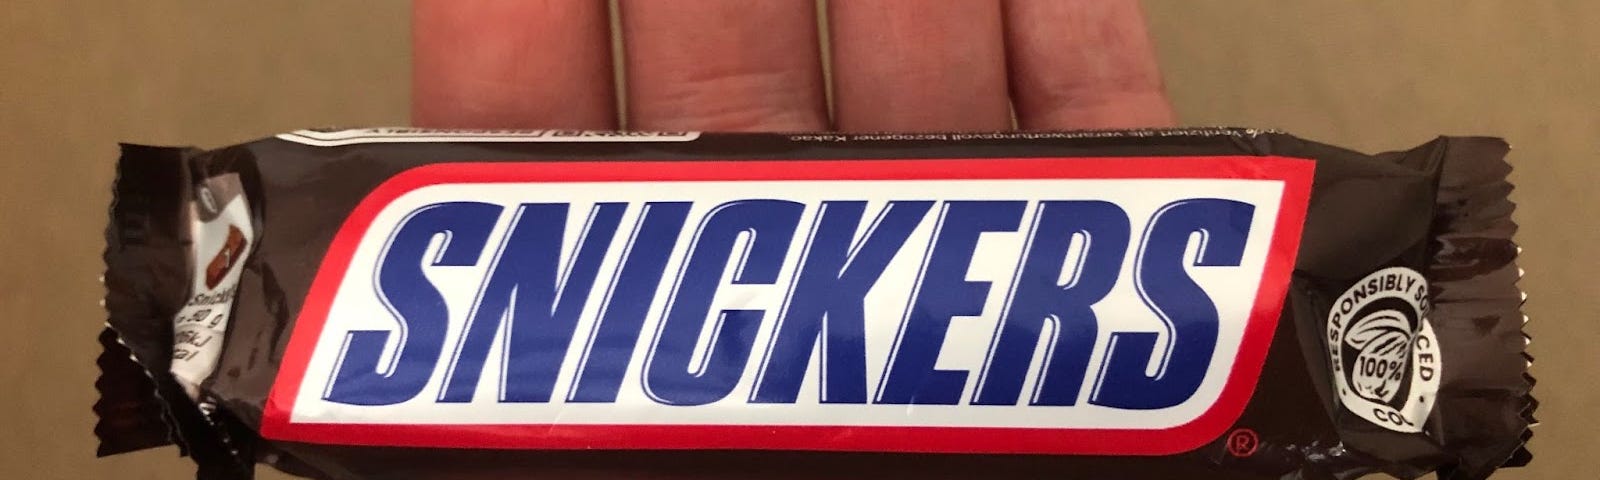 A Snickers bar